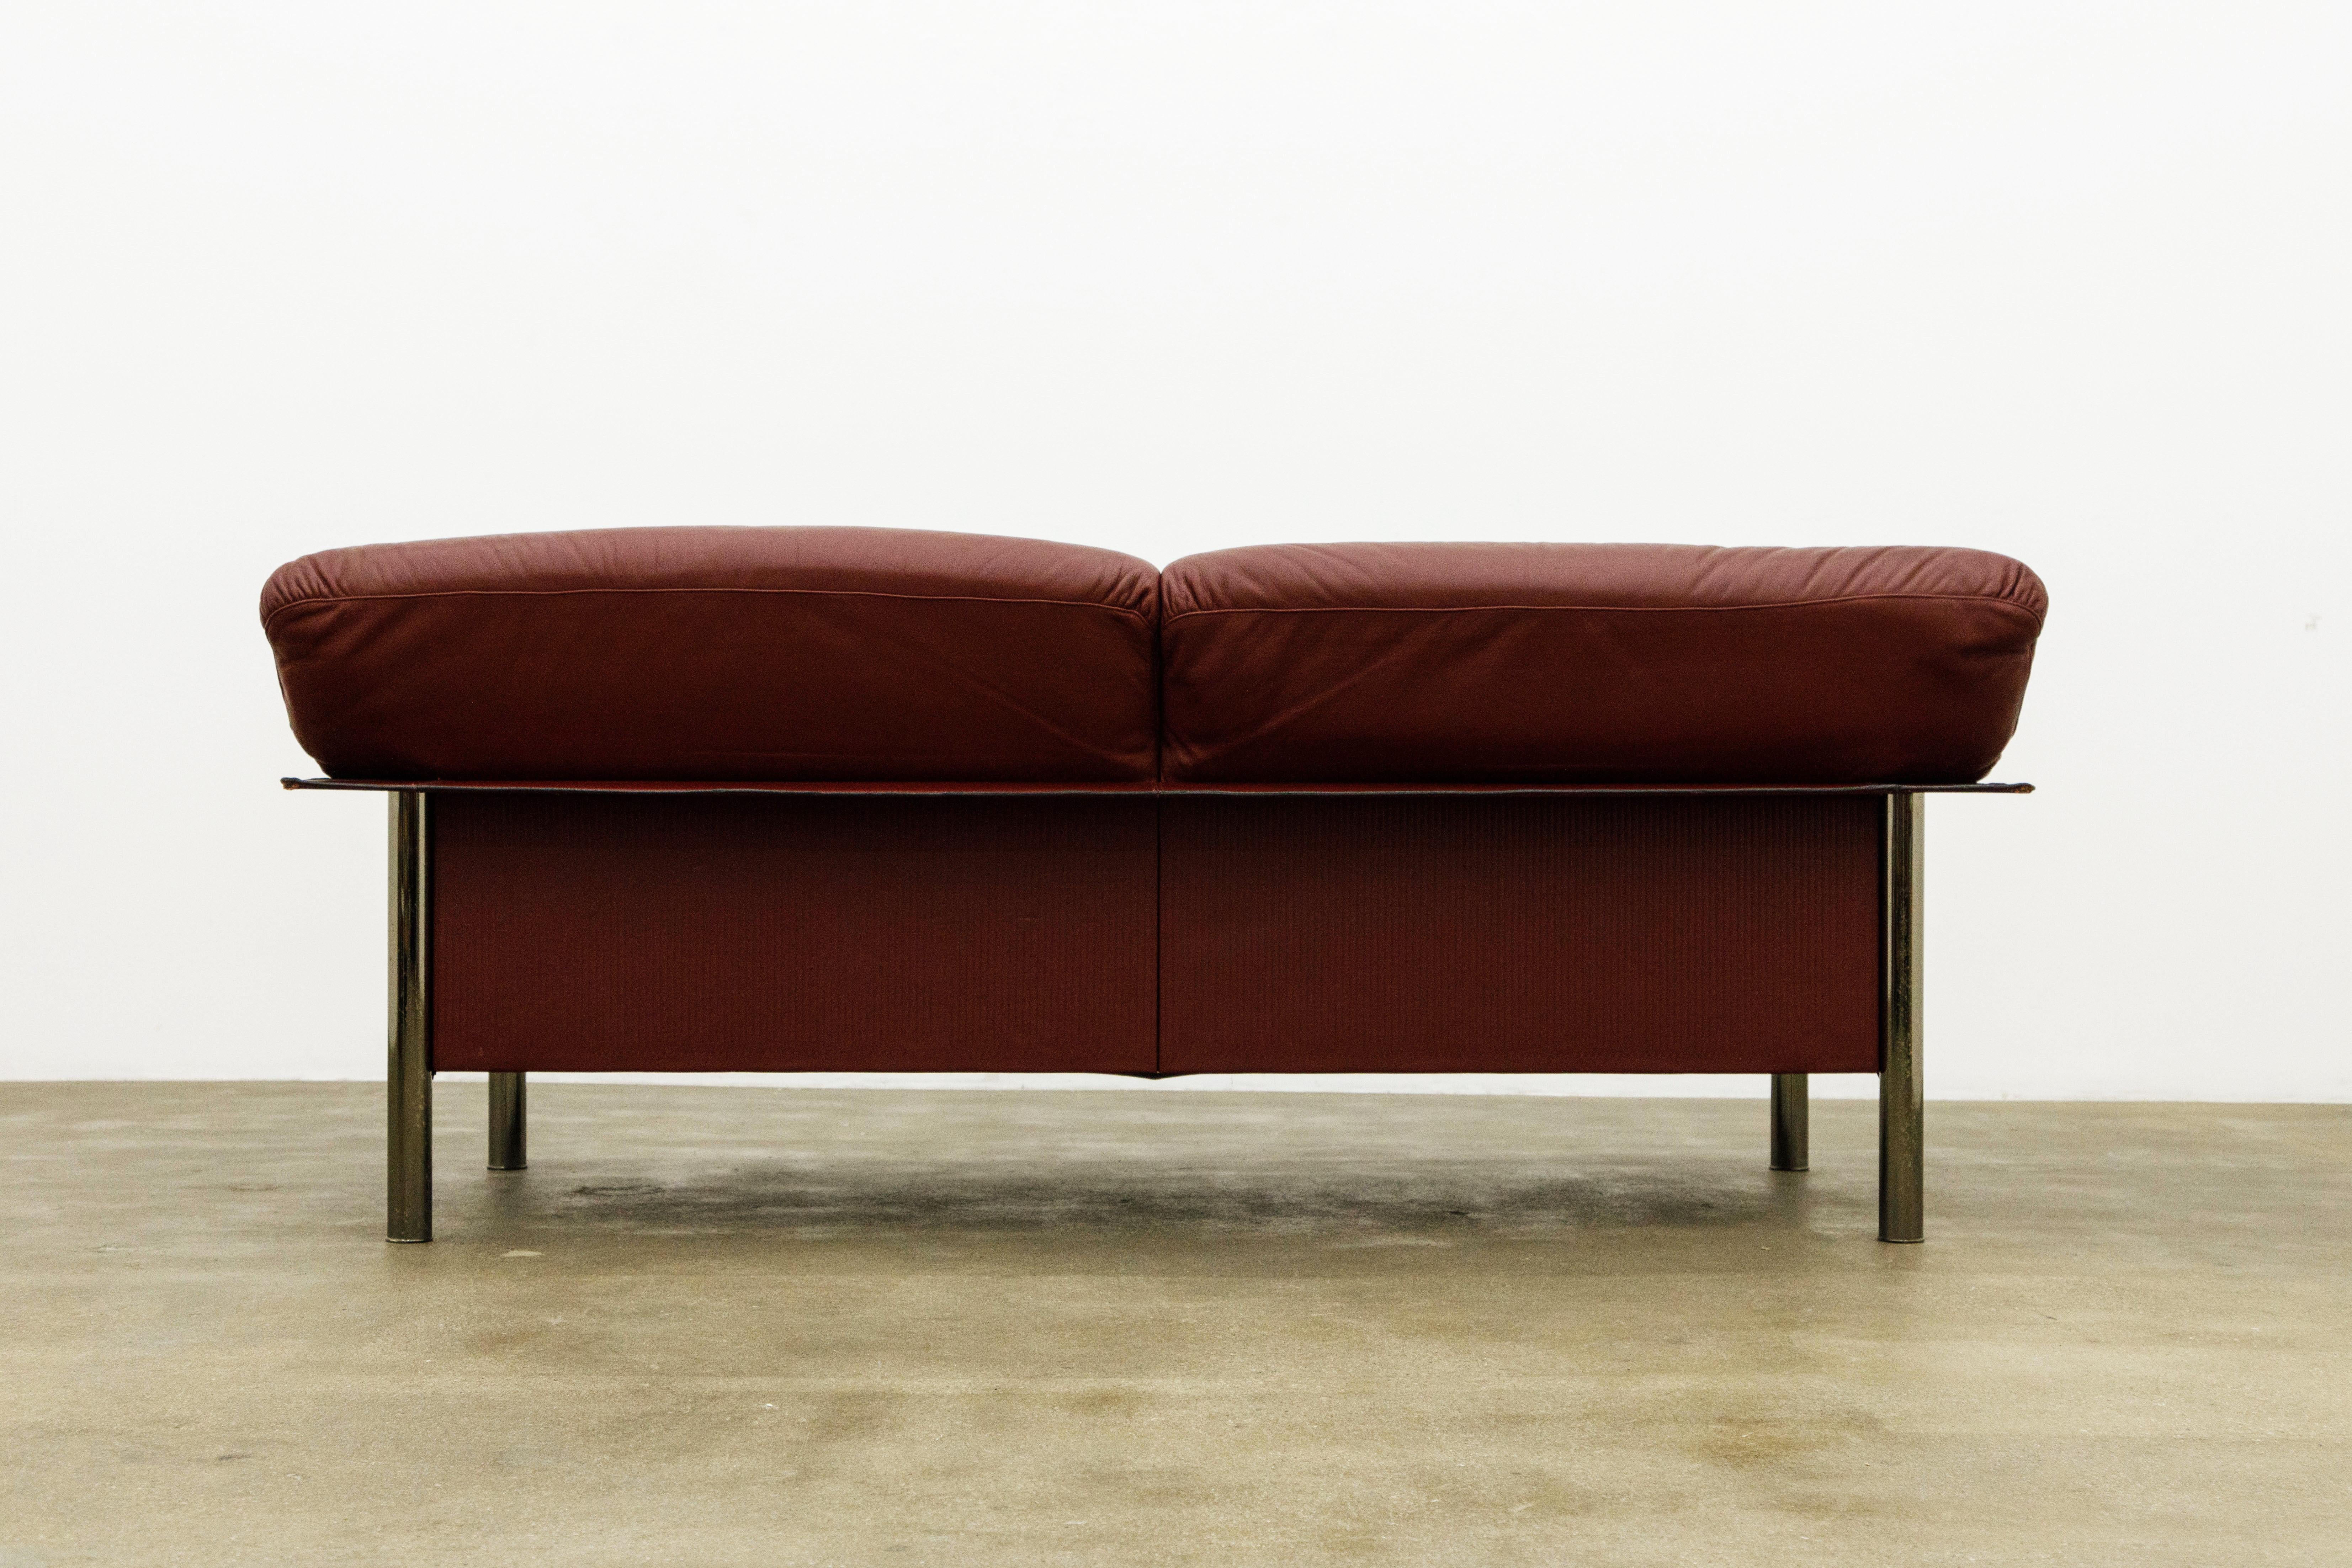 Burgundy Leather Sofa by Pierluigi Cerri for Poltrona Frau, c 1990, Signed  In Good Condition For Sale In Los Angeles, CA